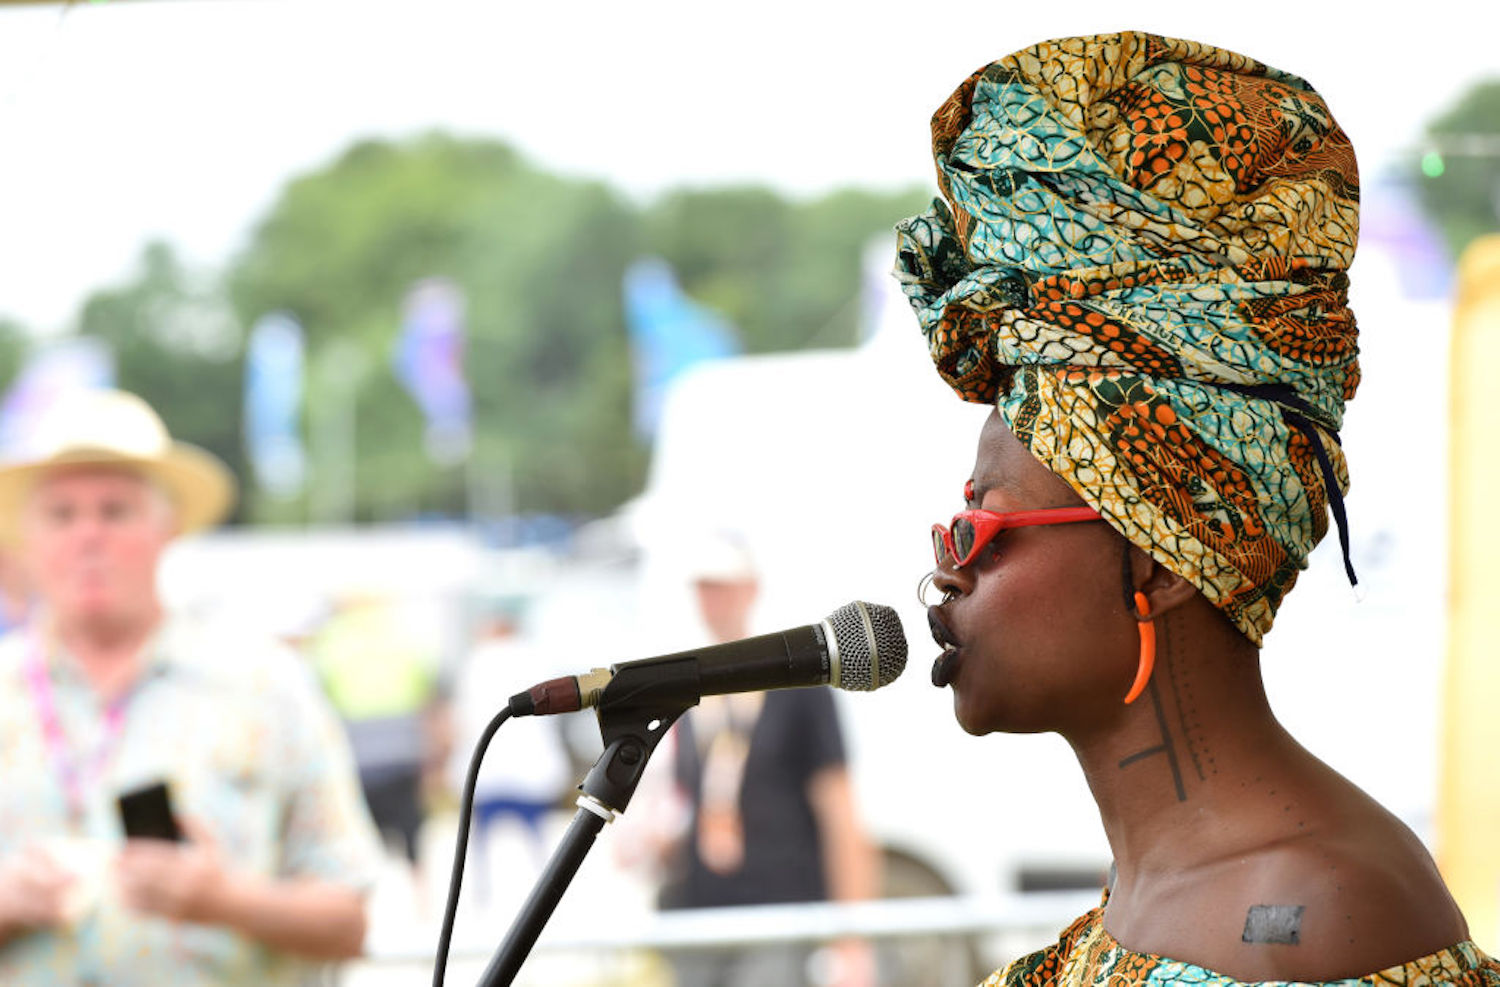 Black Queens Came To Afrochella Dressed To Impress | MadameNoire